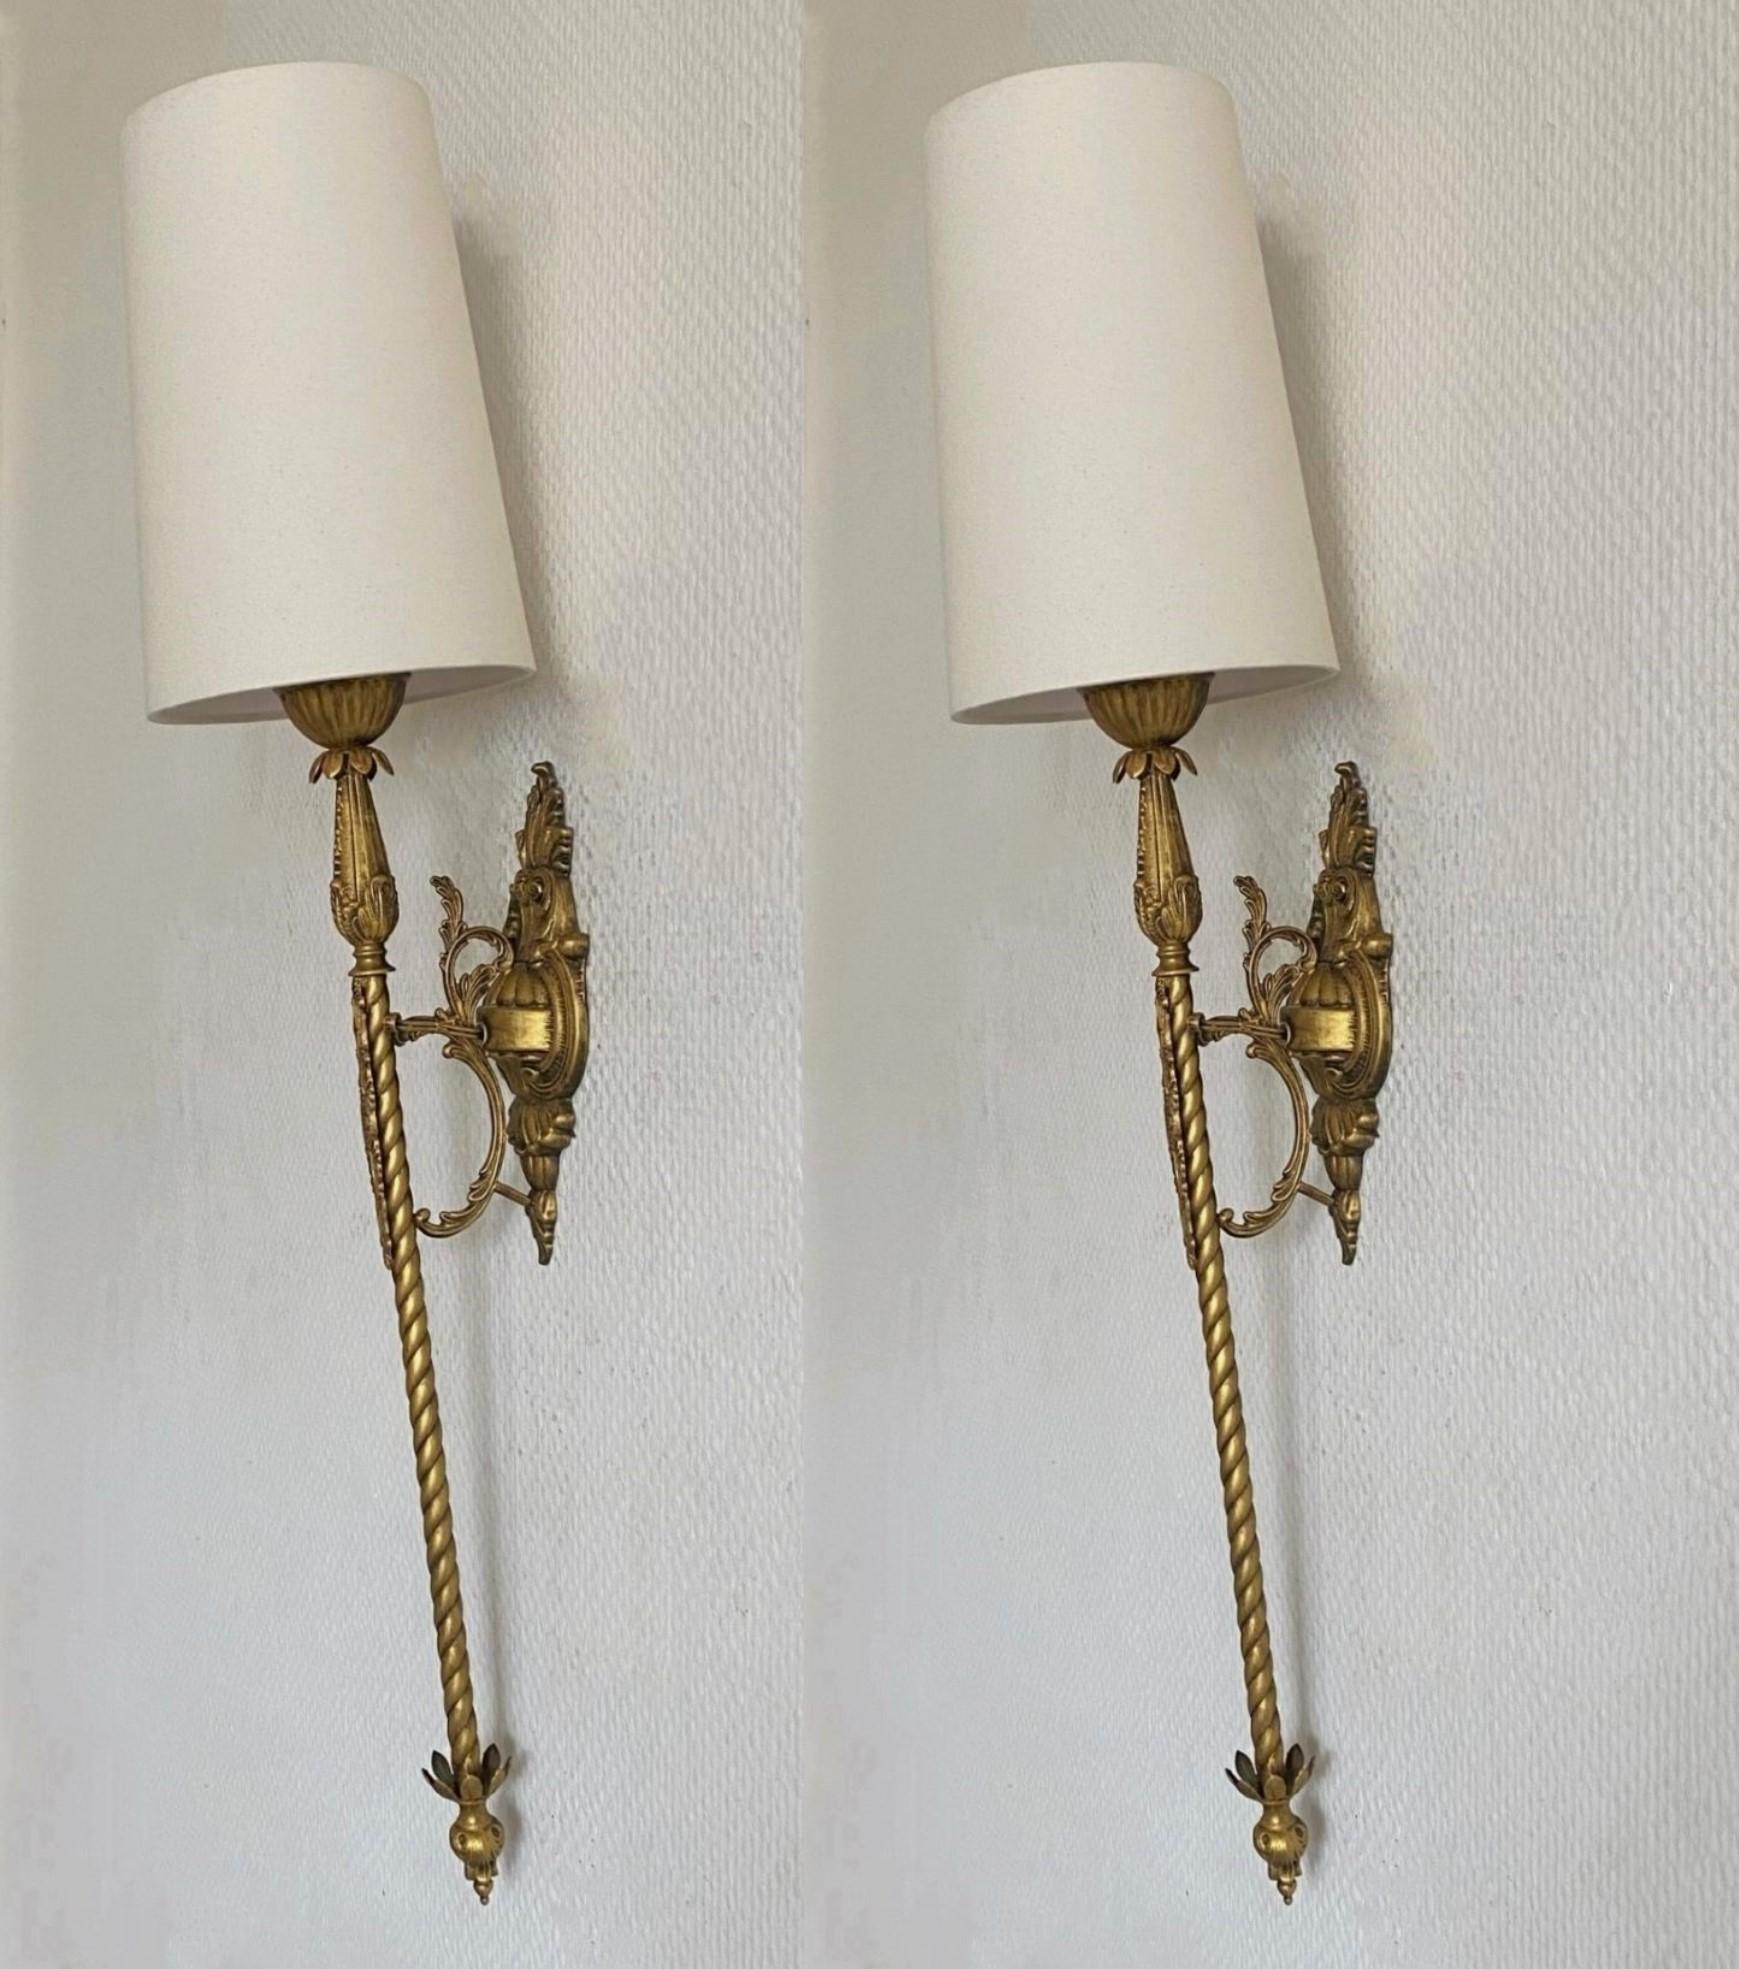 Pair of French Tall Art Deco Bronze Torchiere Wall Sconces, 1930s For Sale 1